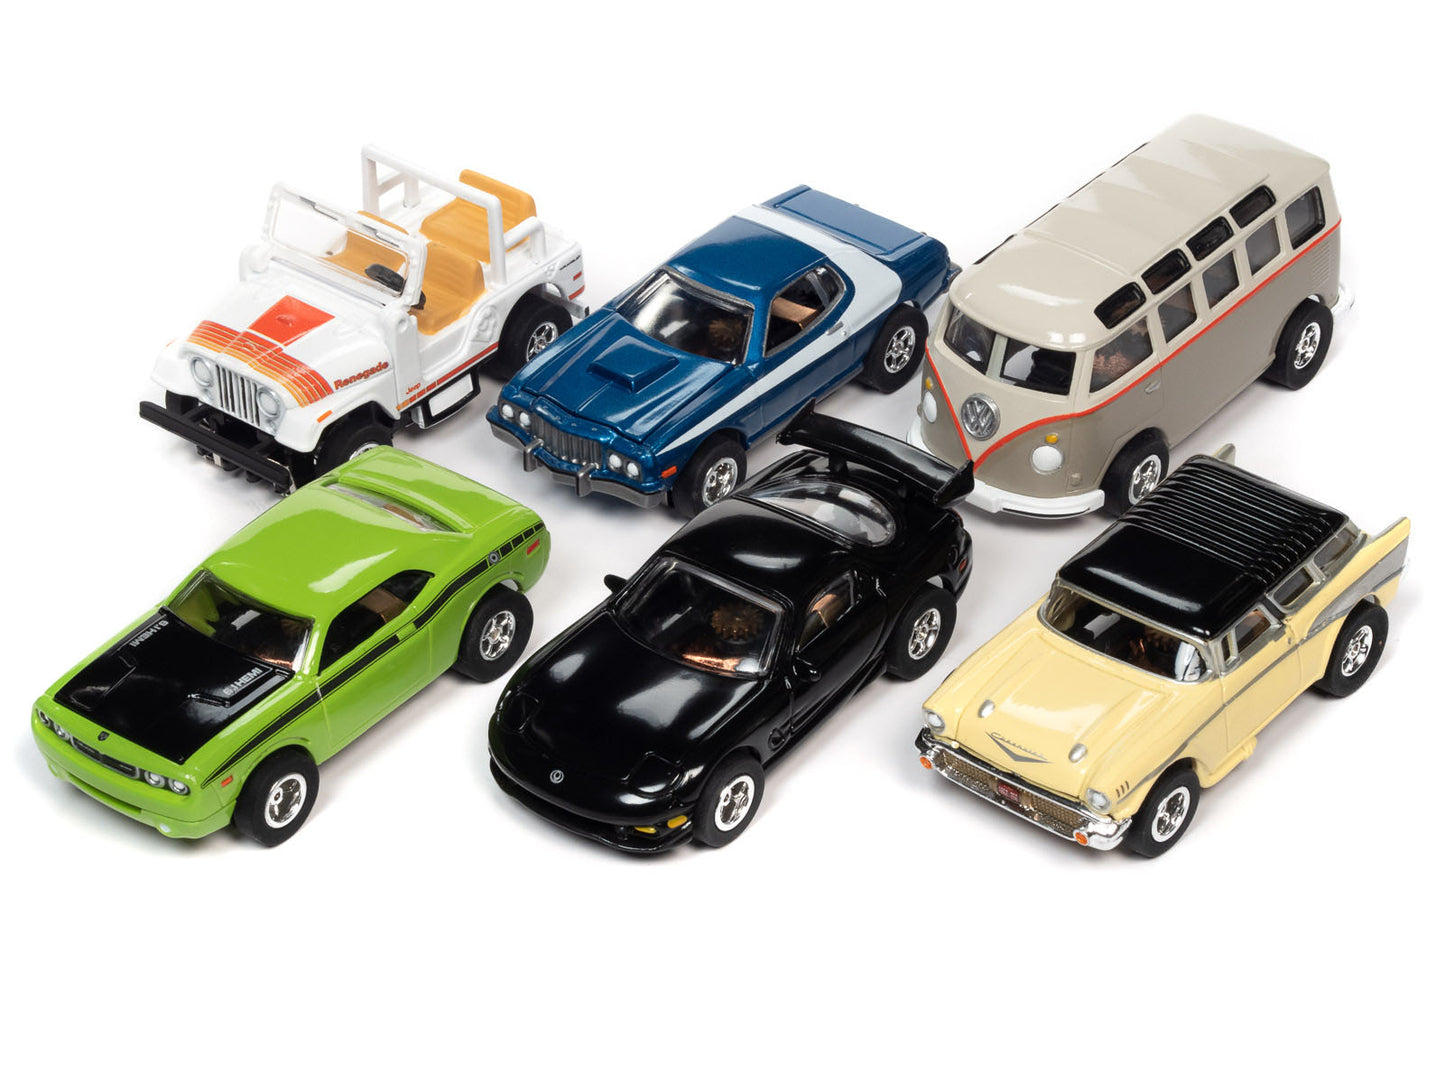 Auto World Xtraction R34 12 Cars Nomad Volkswagen Torino Challenger Jeep Slot - PowerHobby